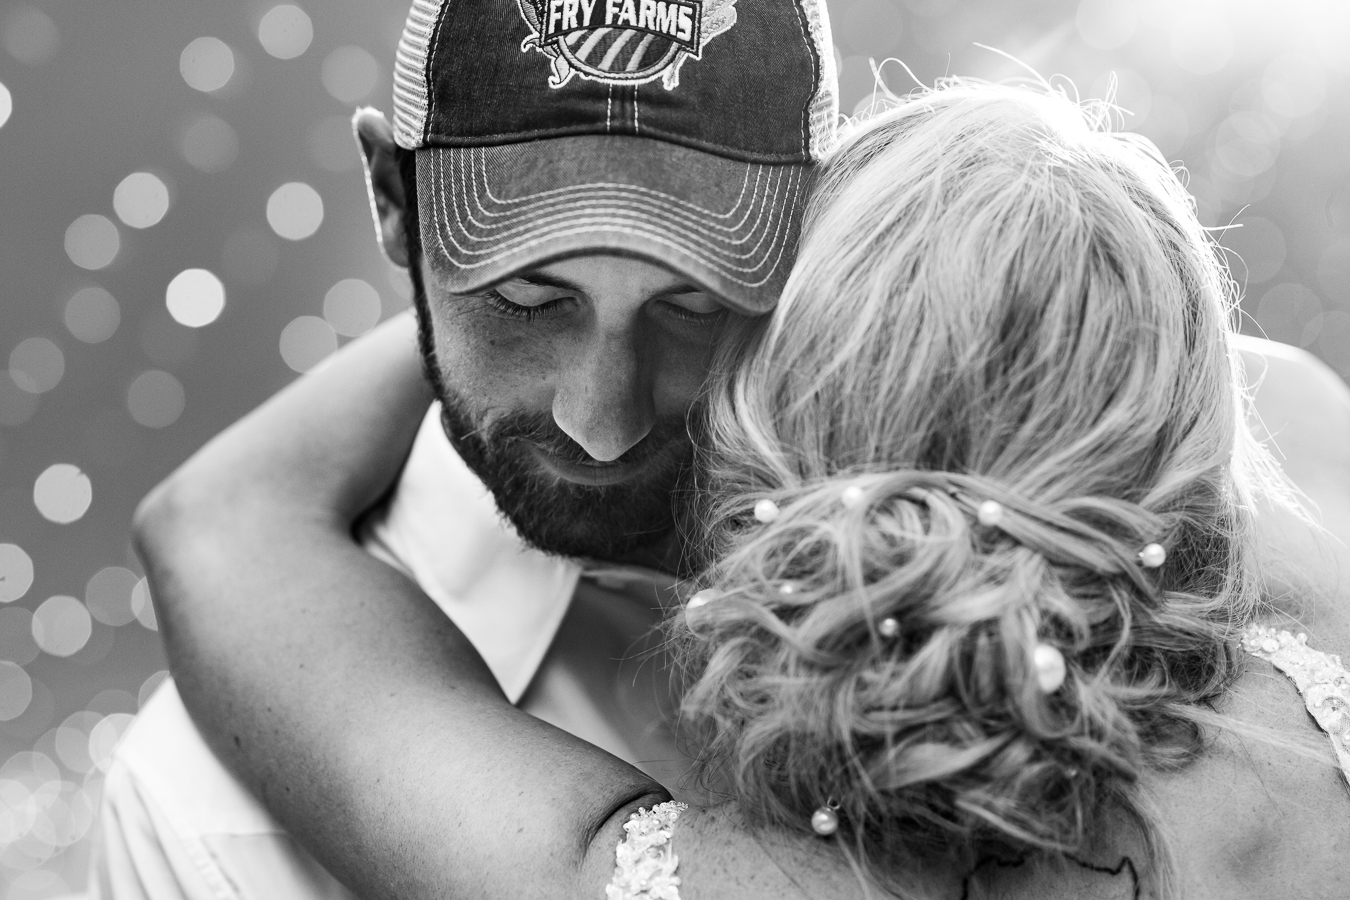 best creative pa wedding photographer, lisa rhinehart, captures this black and white close up image of the bride and groom as they share their first dance together during their country inspired wedding reception in halifax pa 